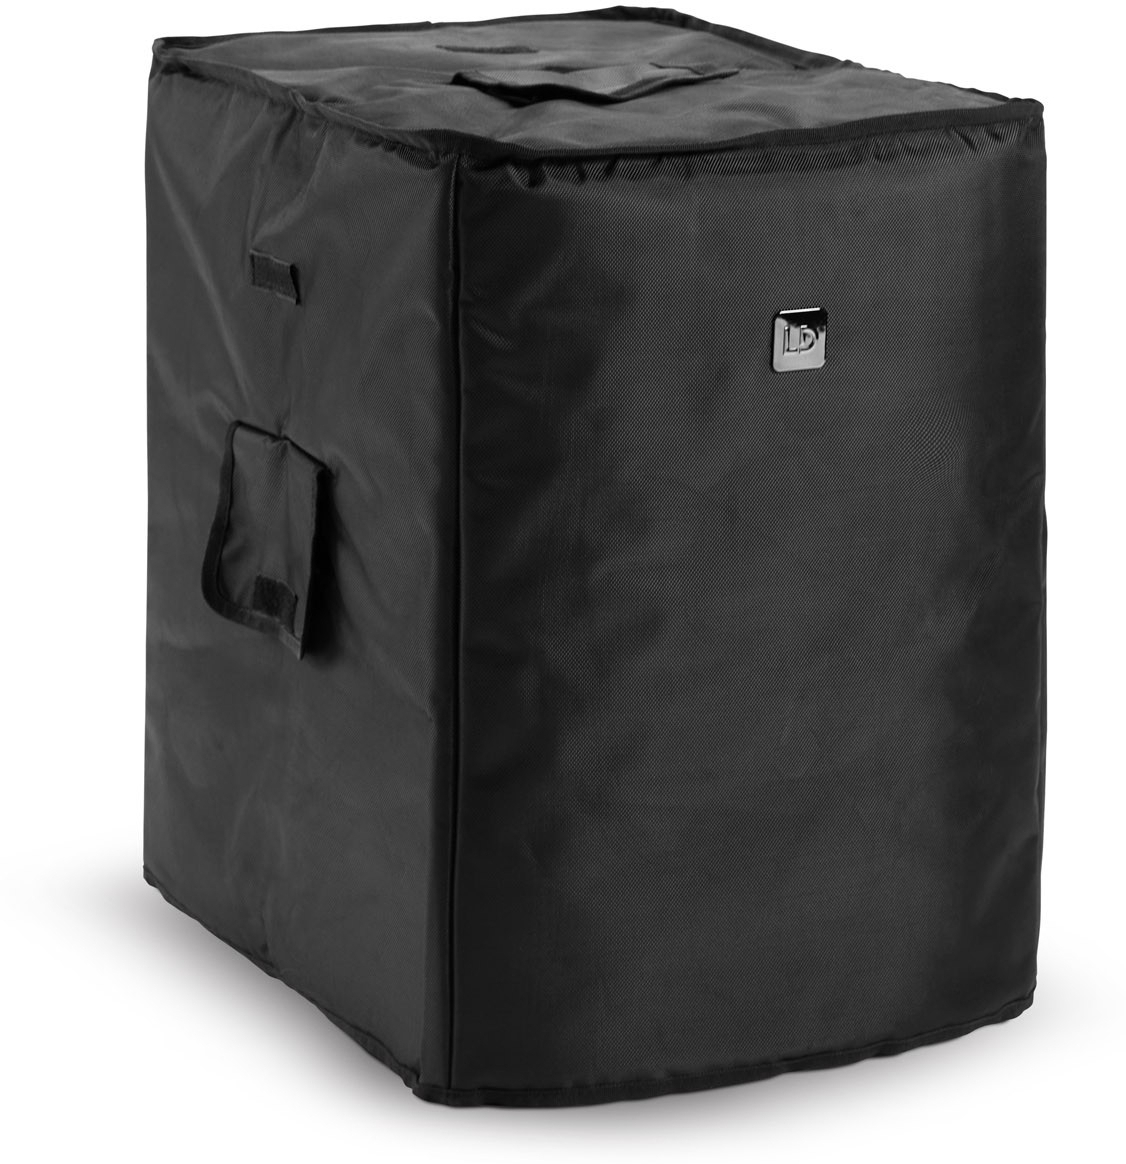 Ld Systems Maui 28 G3 Sub Pc - Bag for speakers & subwoofer - Main picture